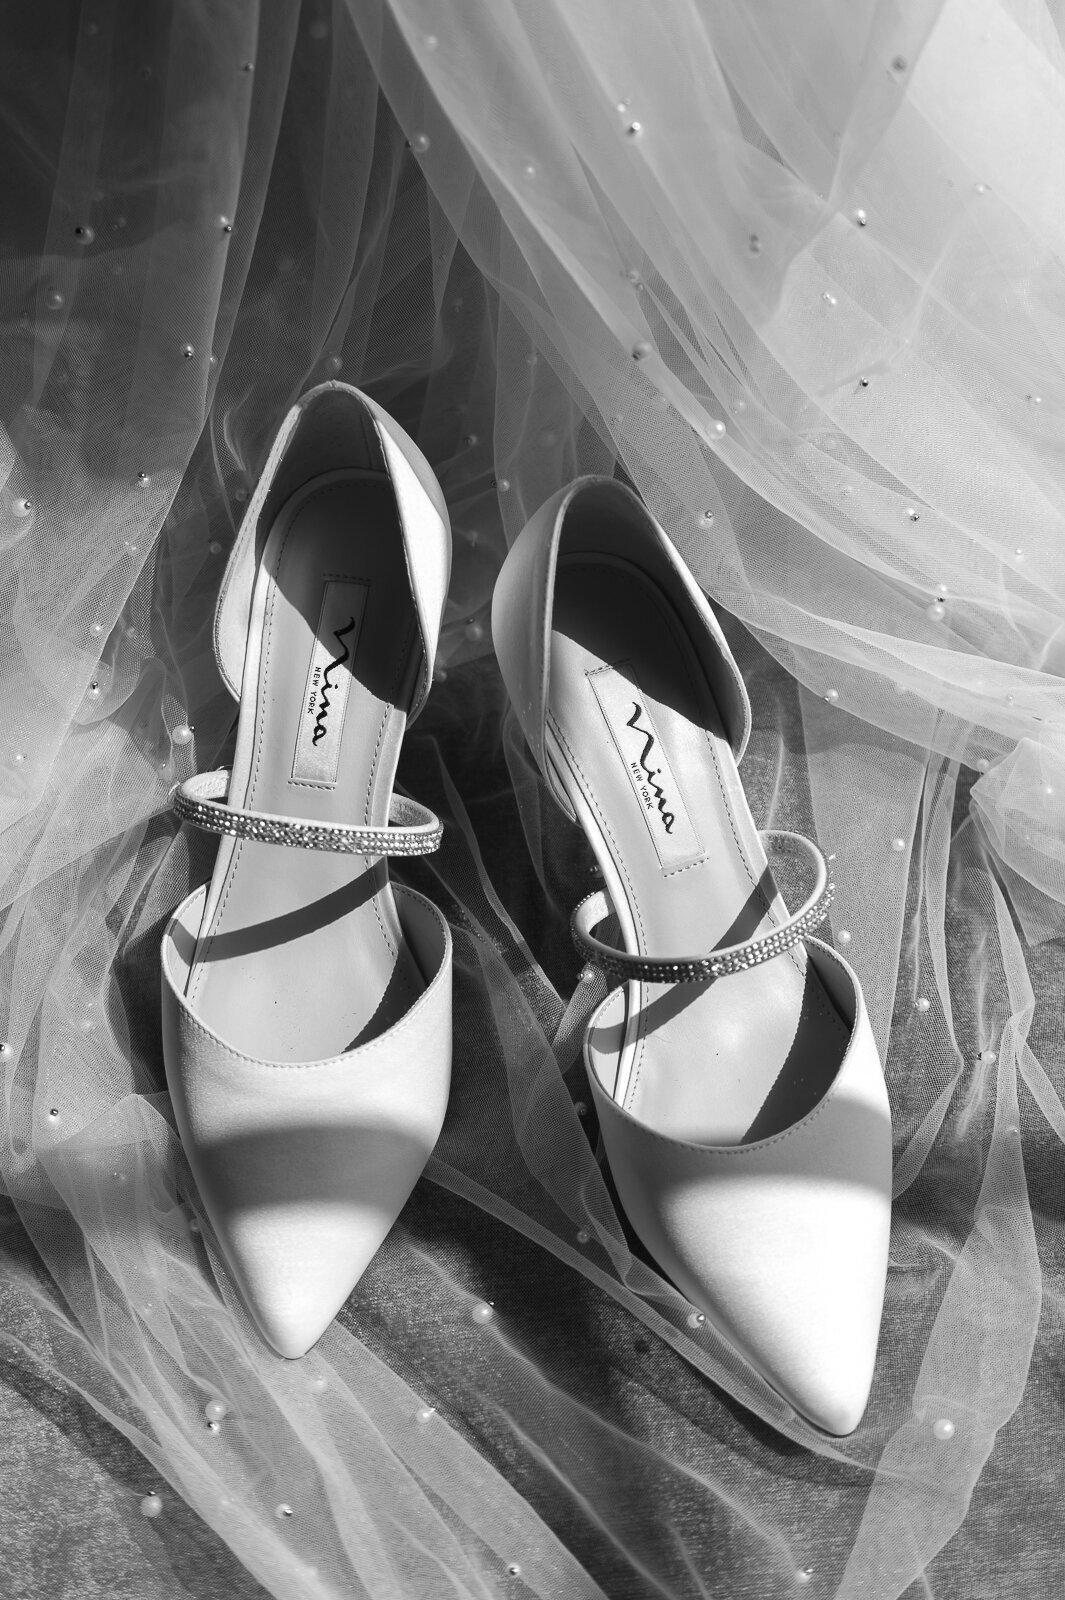 Beautiful light cascaded on the brides wedding shoes and pearled veil.